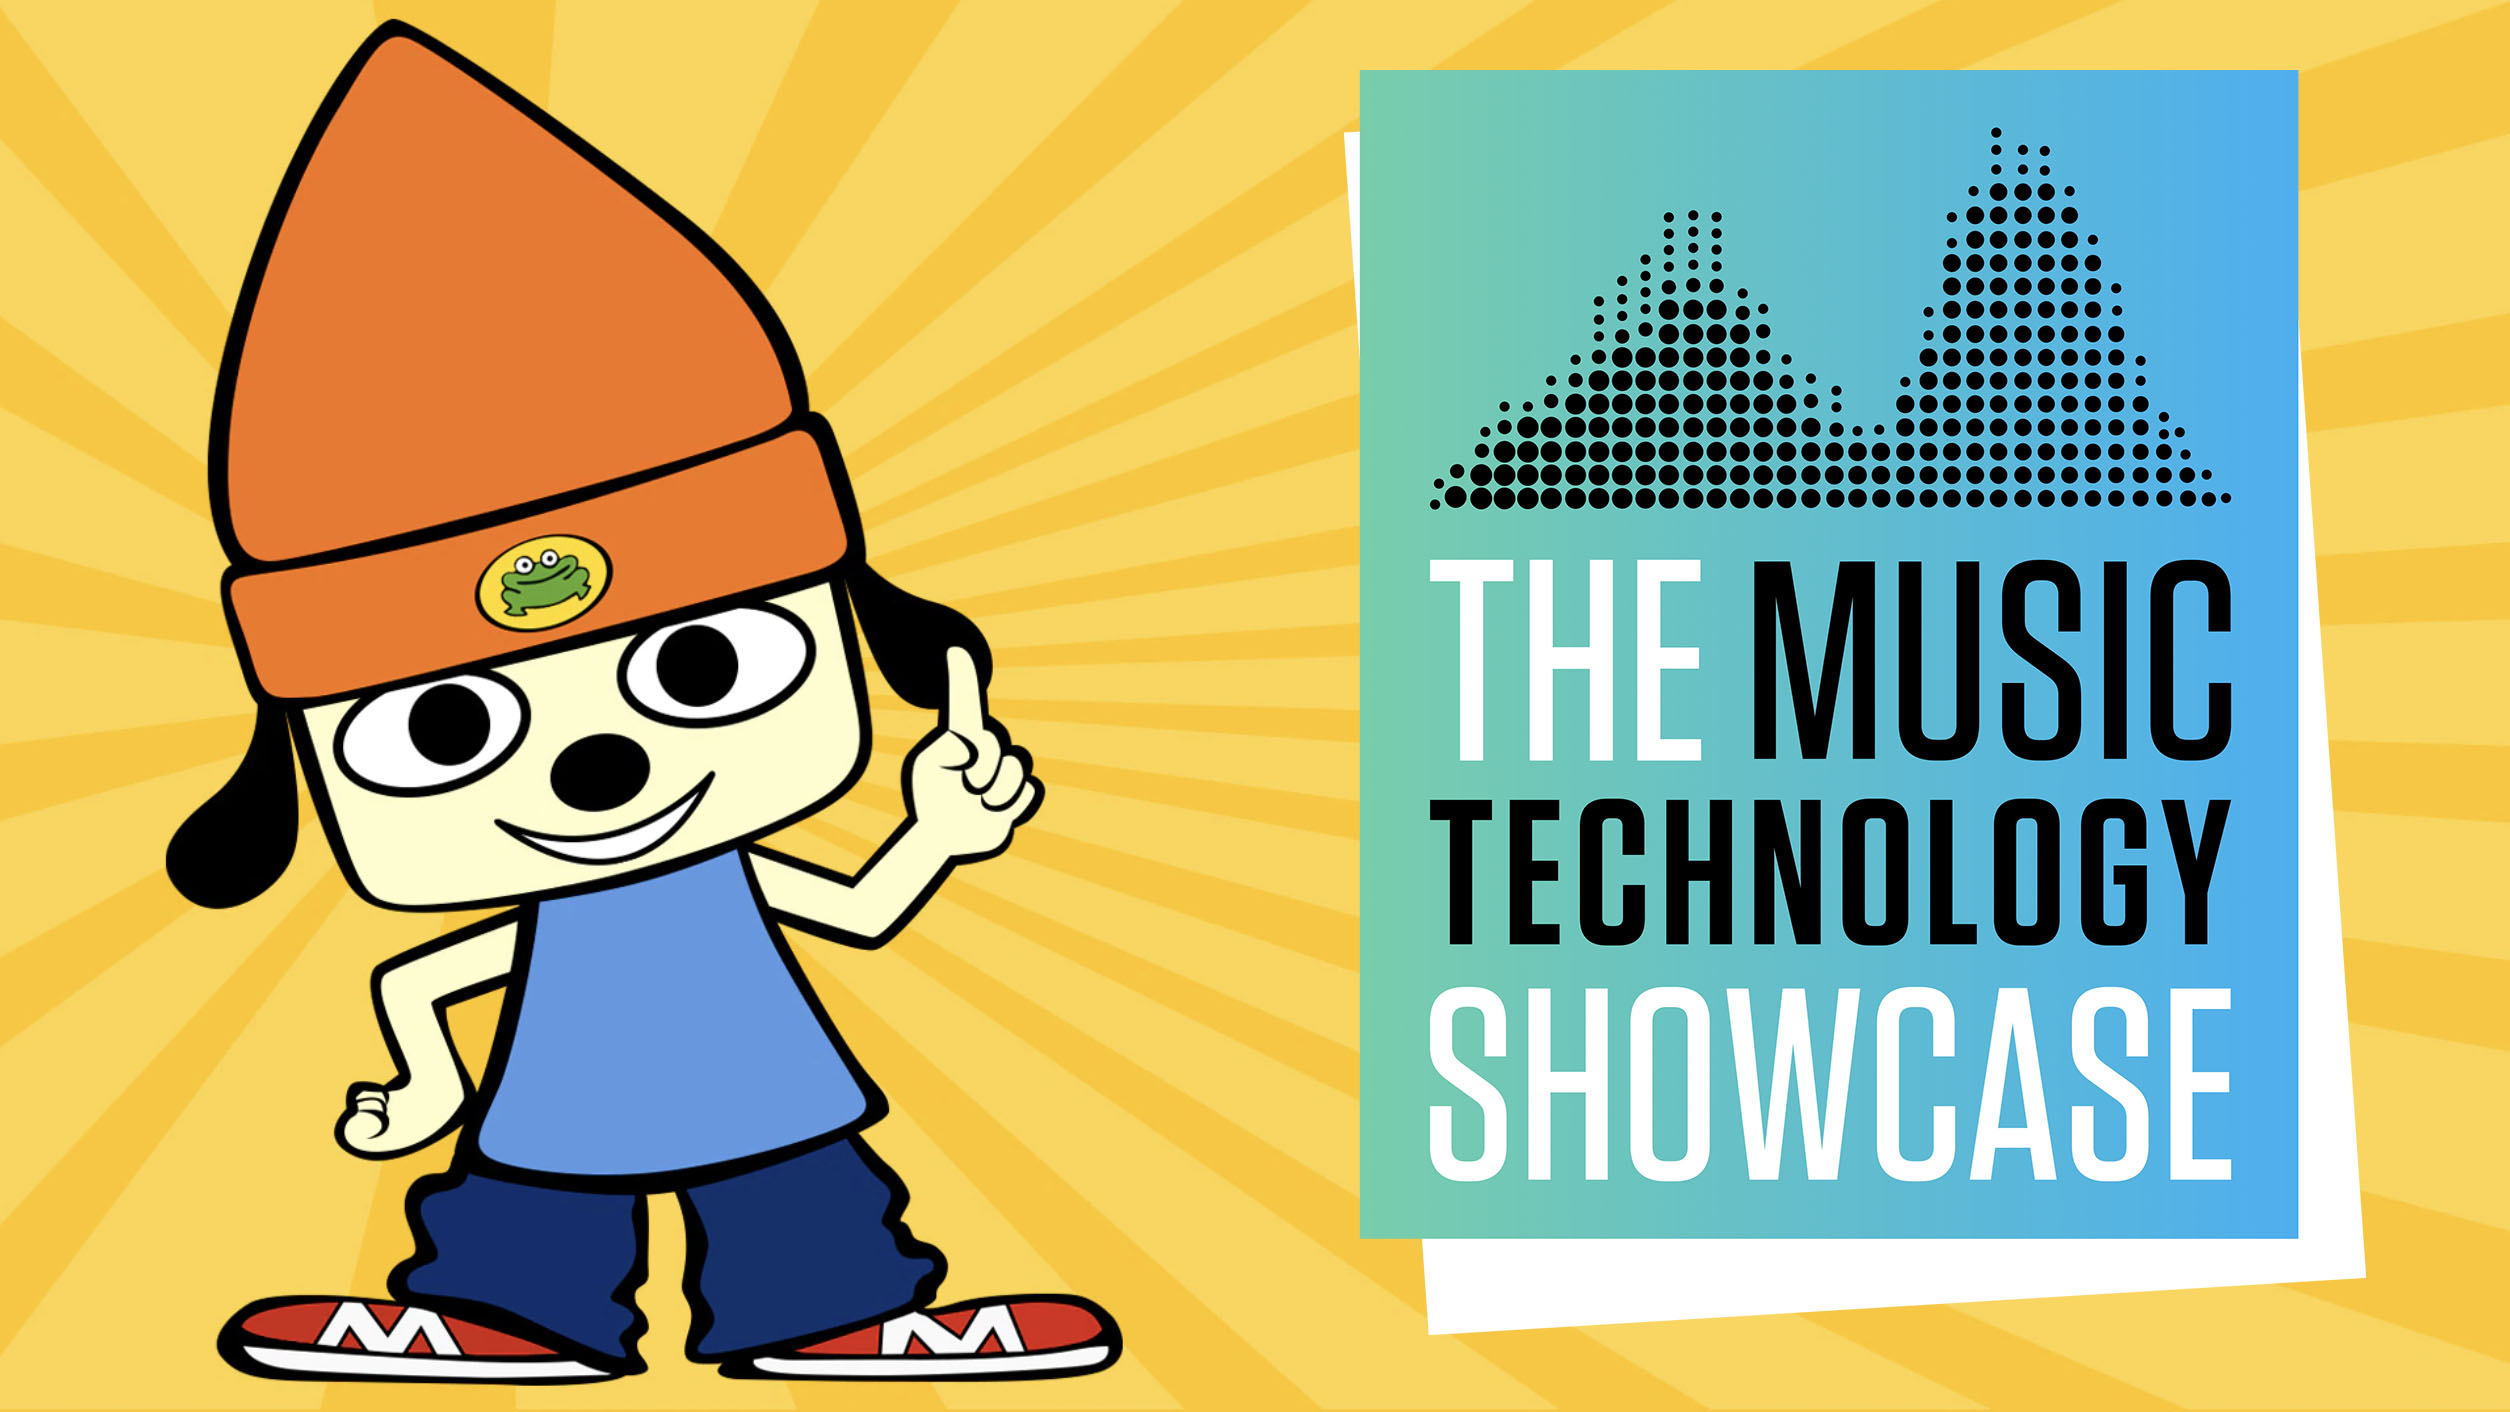 How 'PaRappa the Rapper' Took Music Video Games to the Next Level